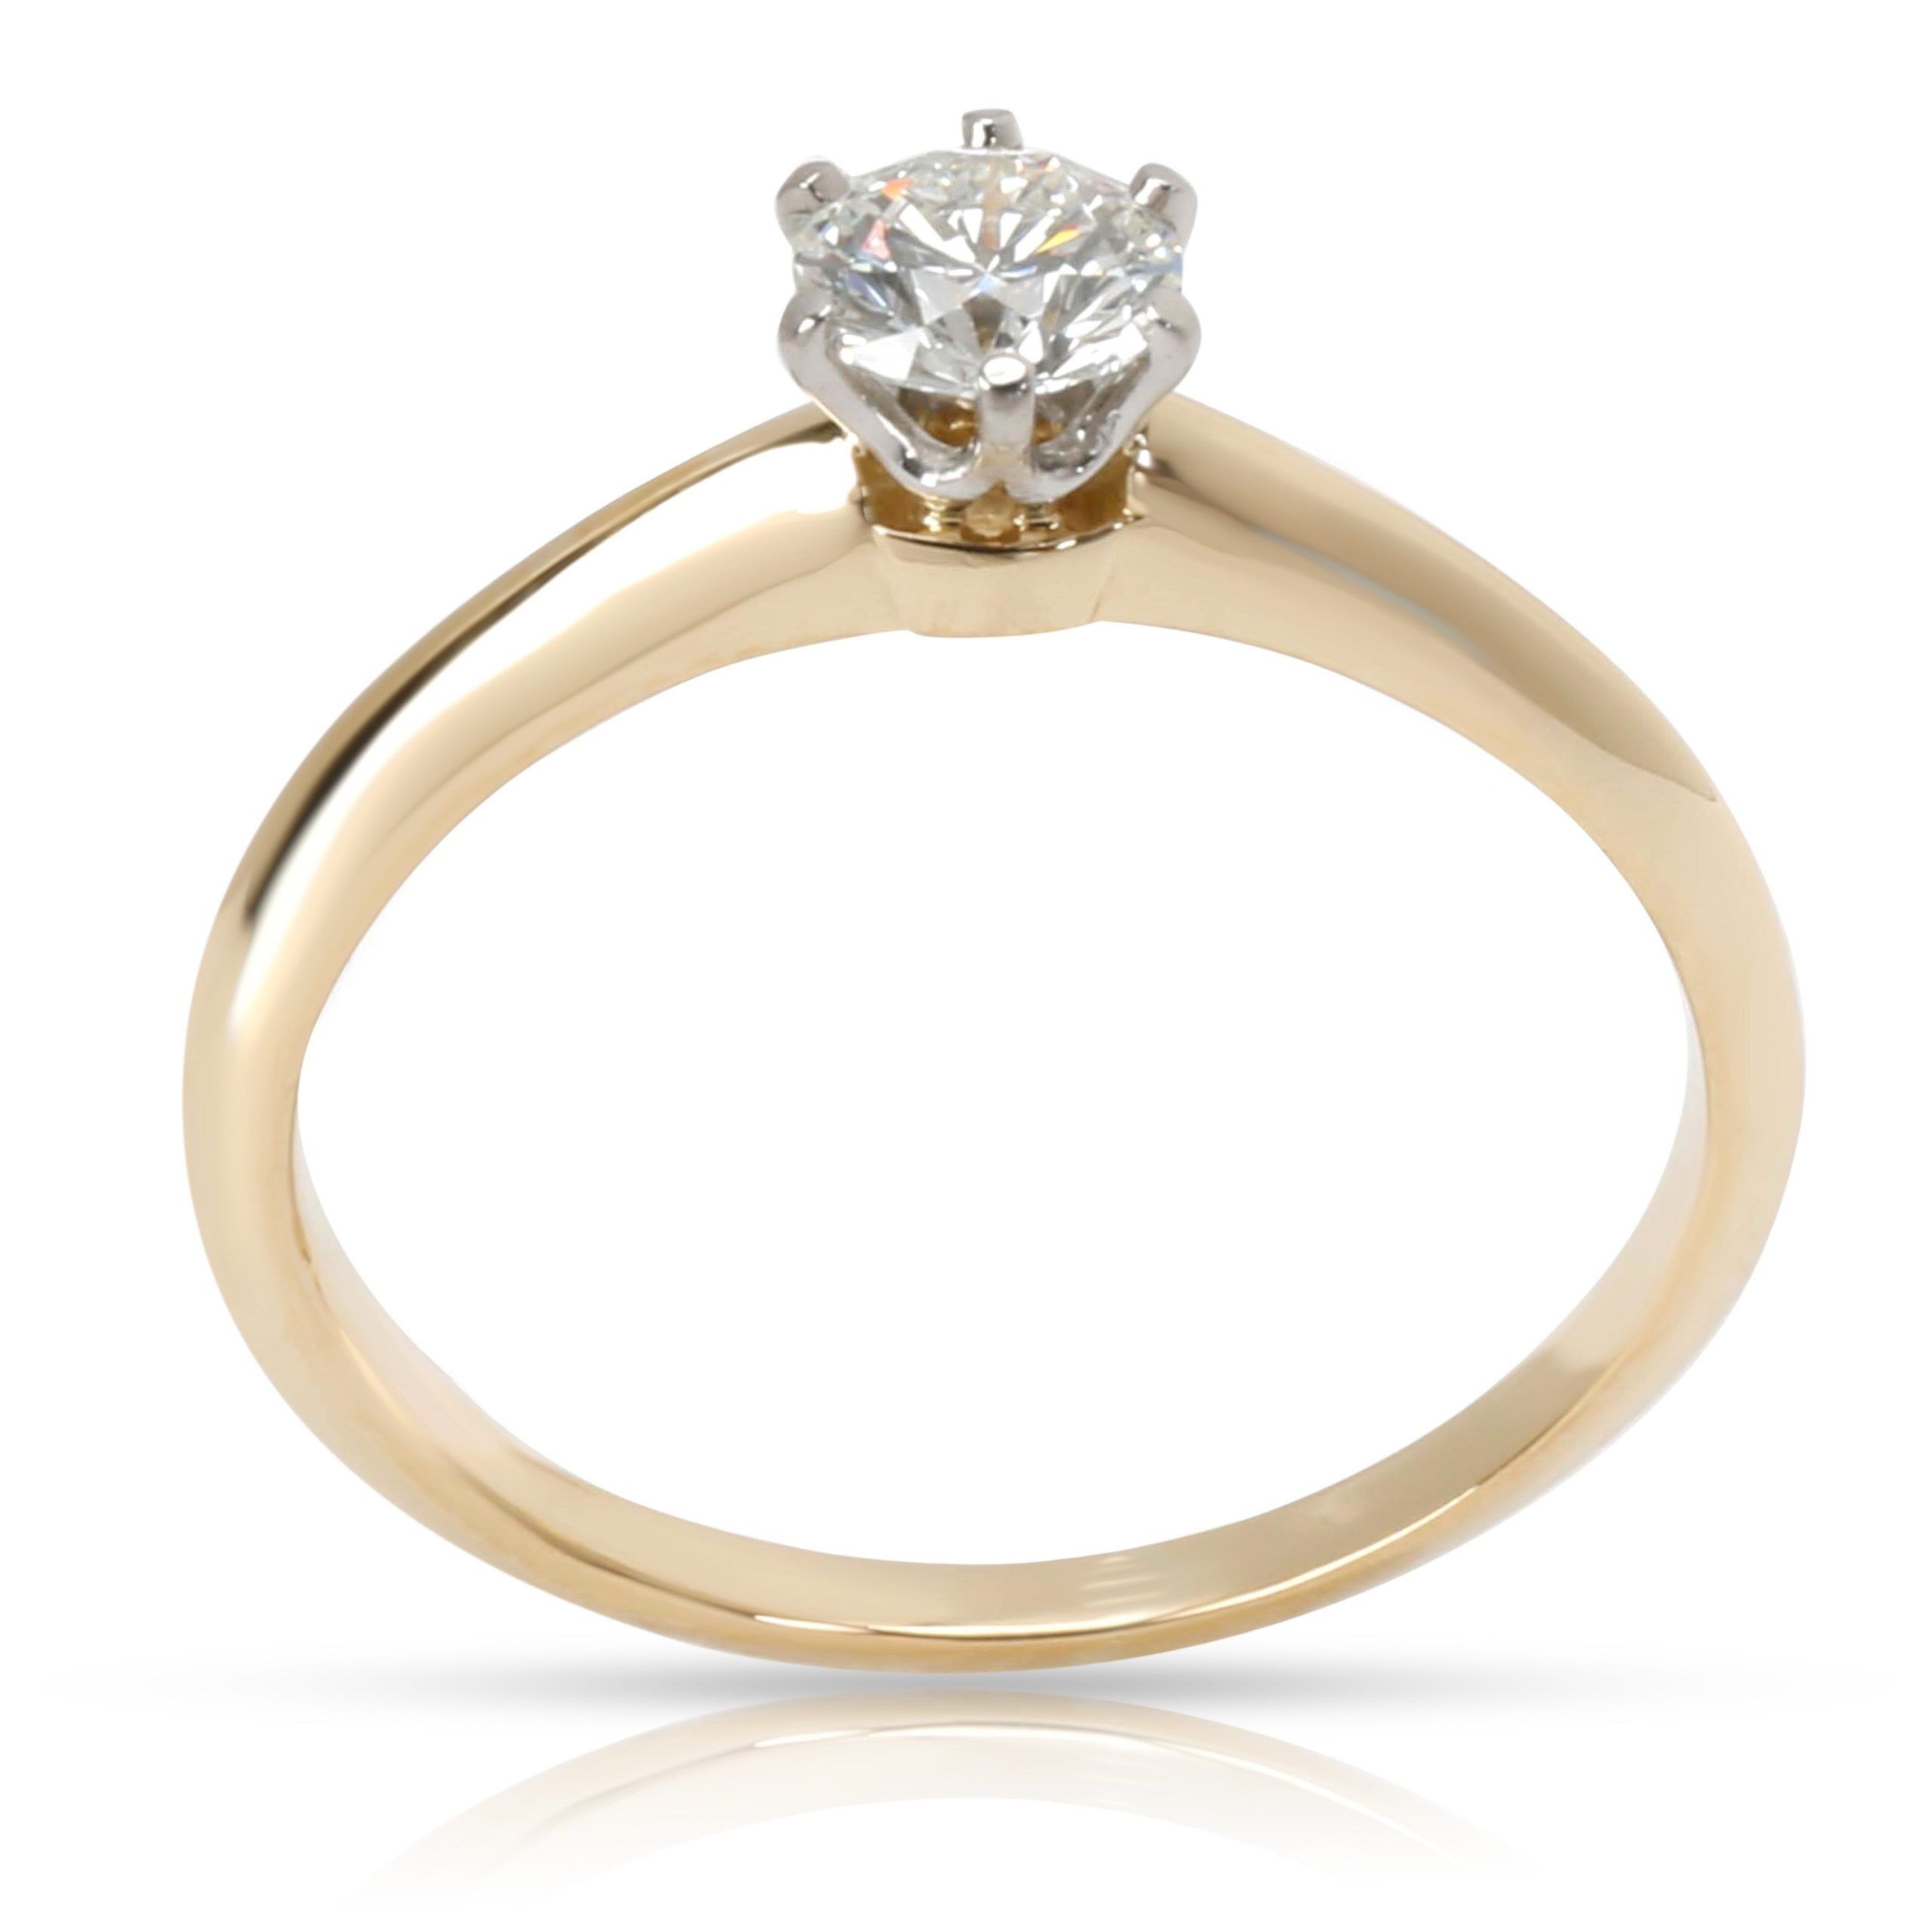 Tiffany & Co. Tiffany & Co. Solitaire Diamond Engagement Ring in 18K Gold I VVS2 0.41CTW Size ONE SIZE - 3 Thumbnail